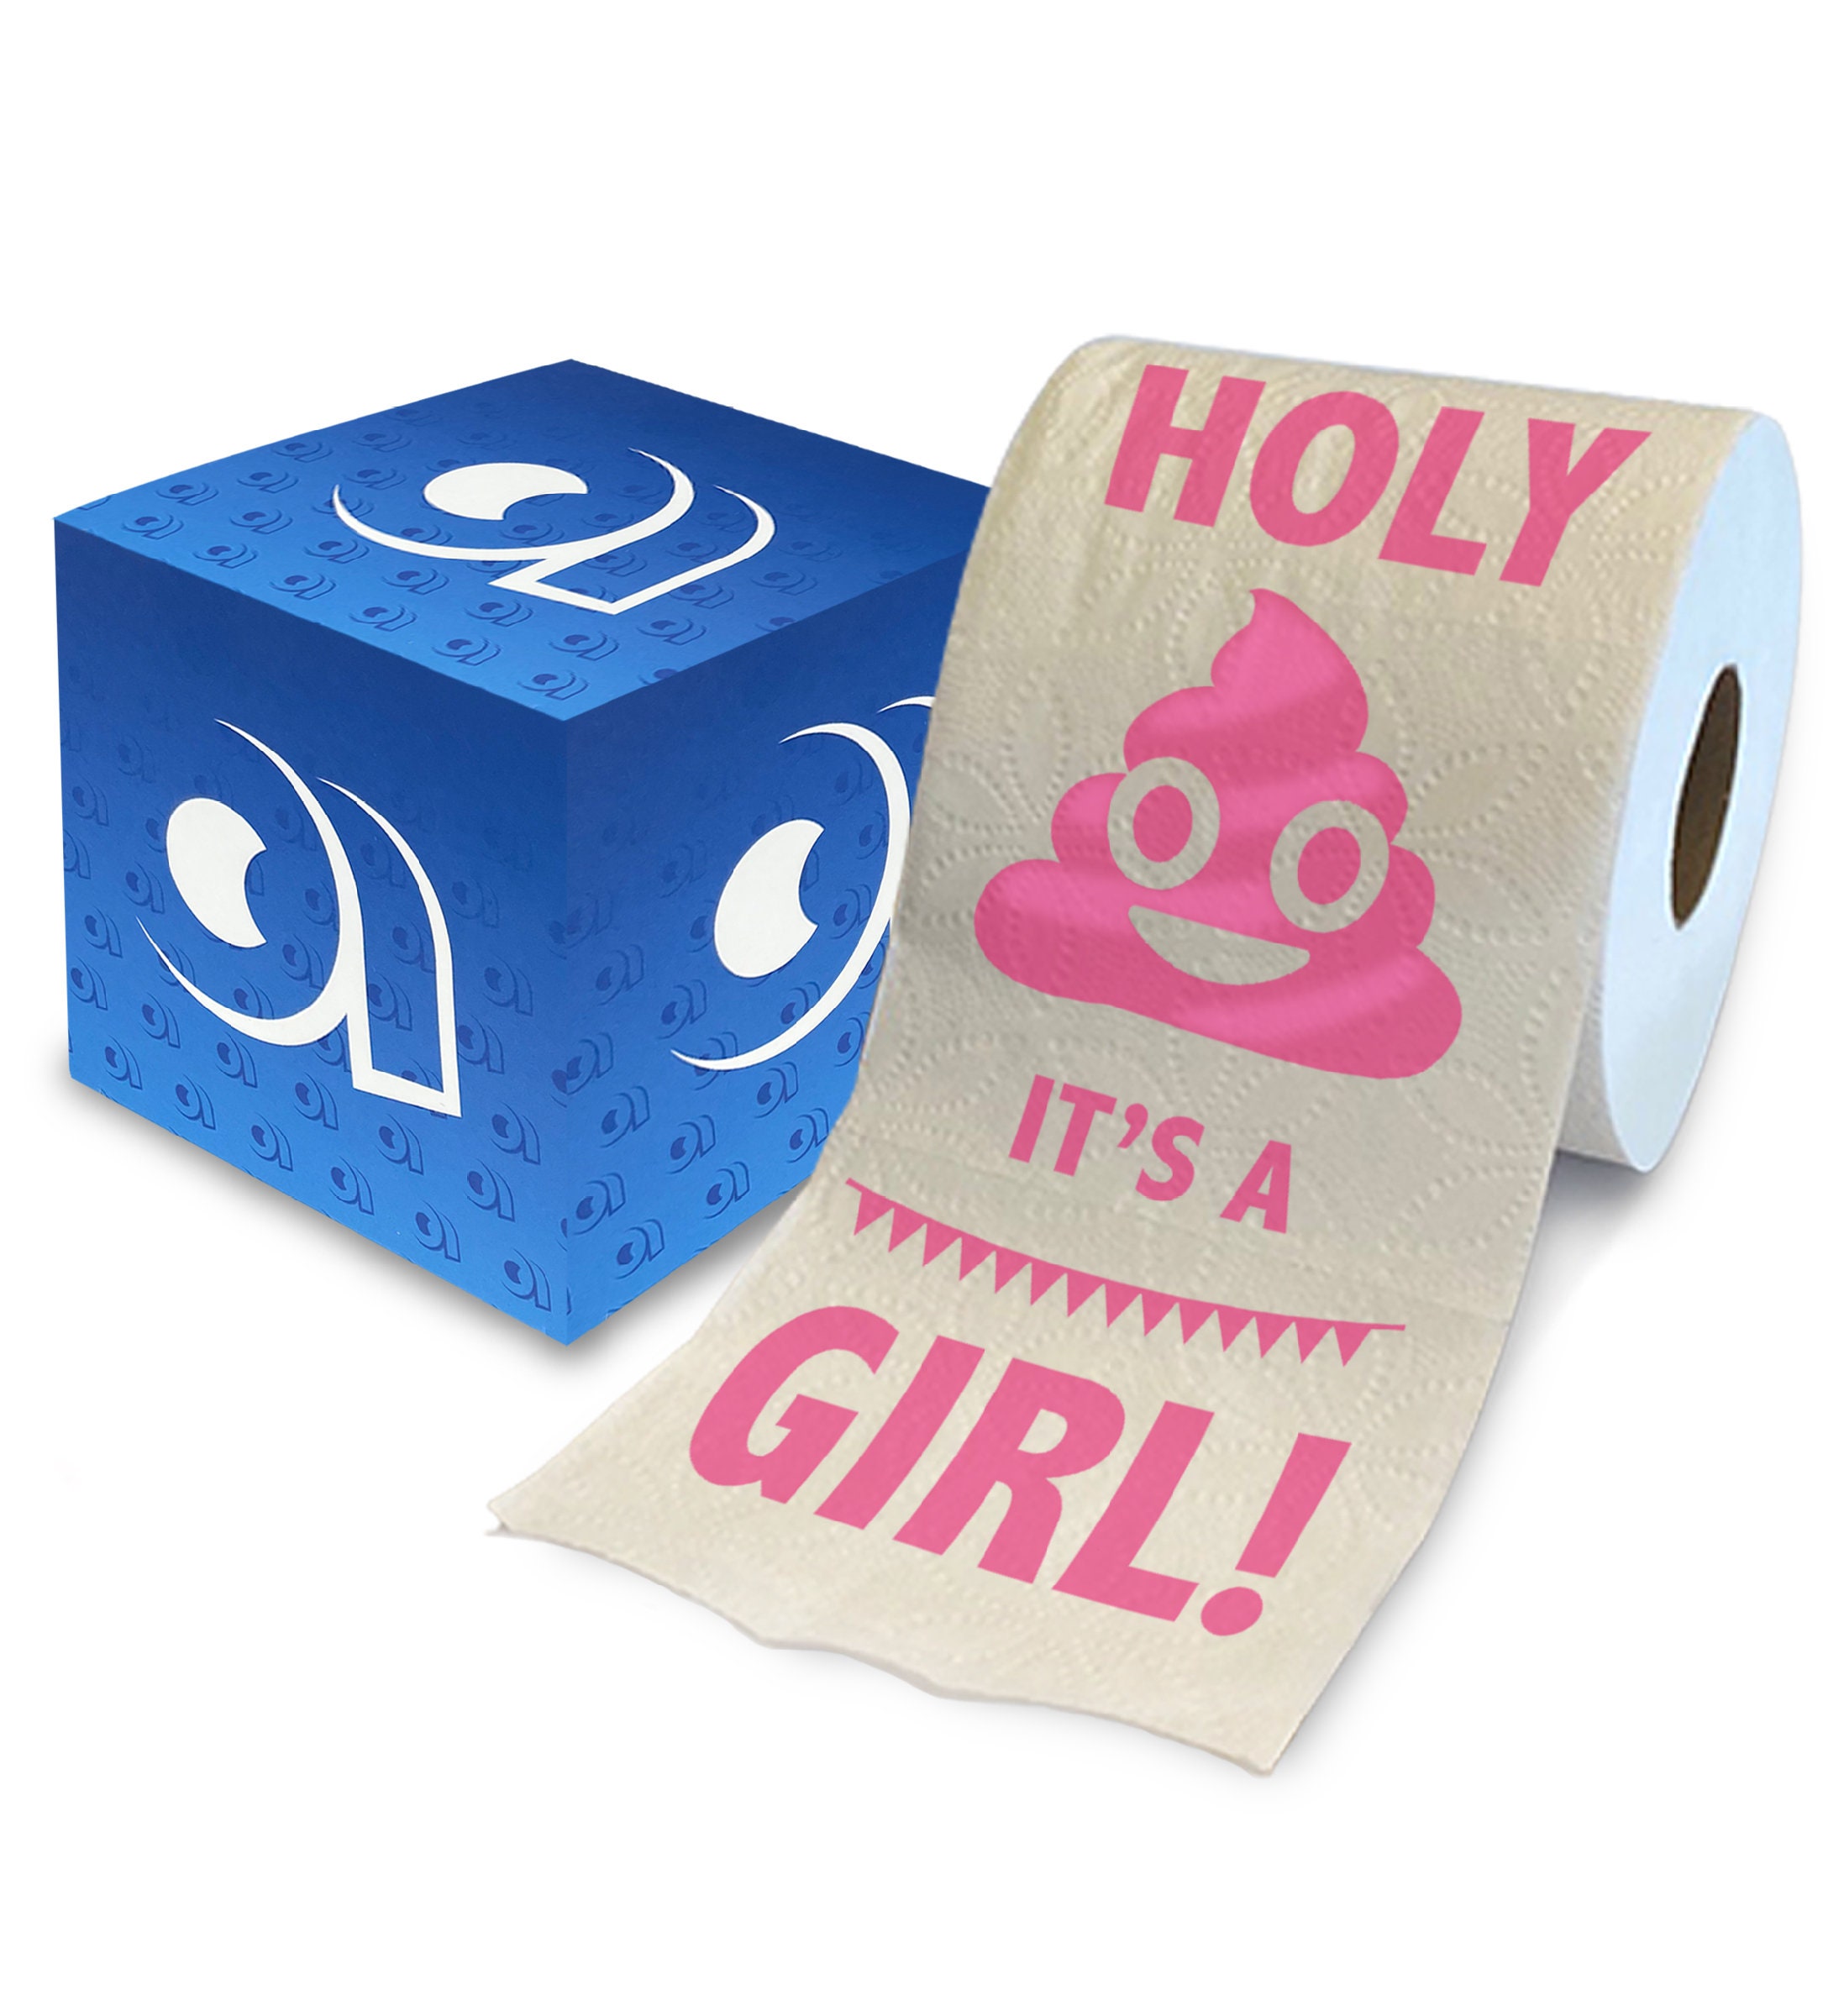 Printed TP Happy Valentine's Printed Toilet Paper Funny Gag Gift